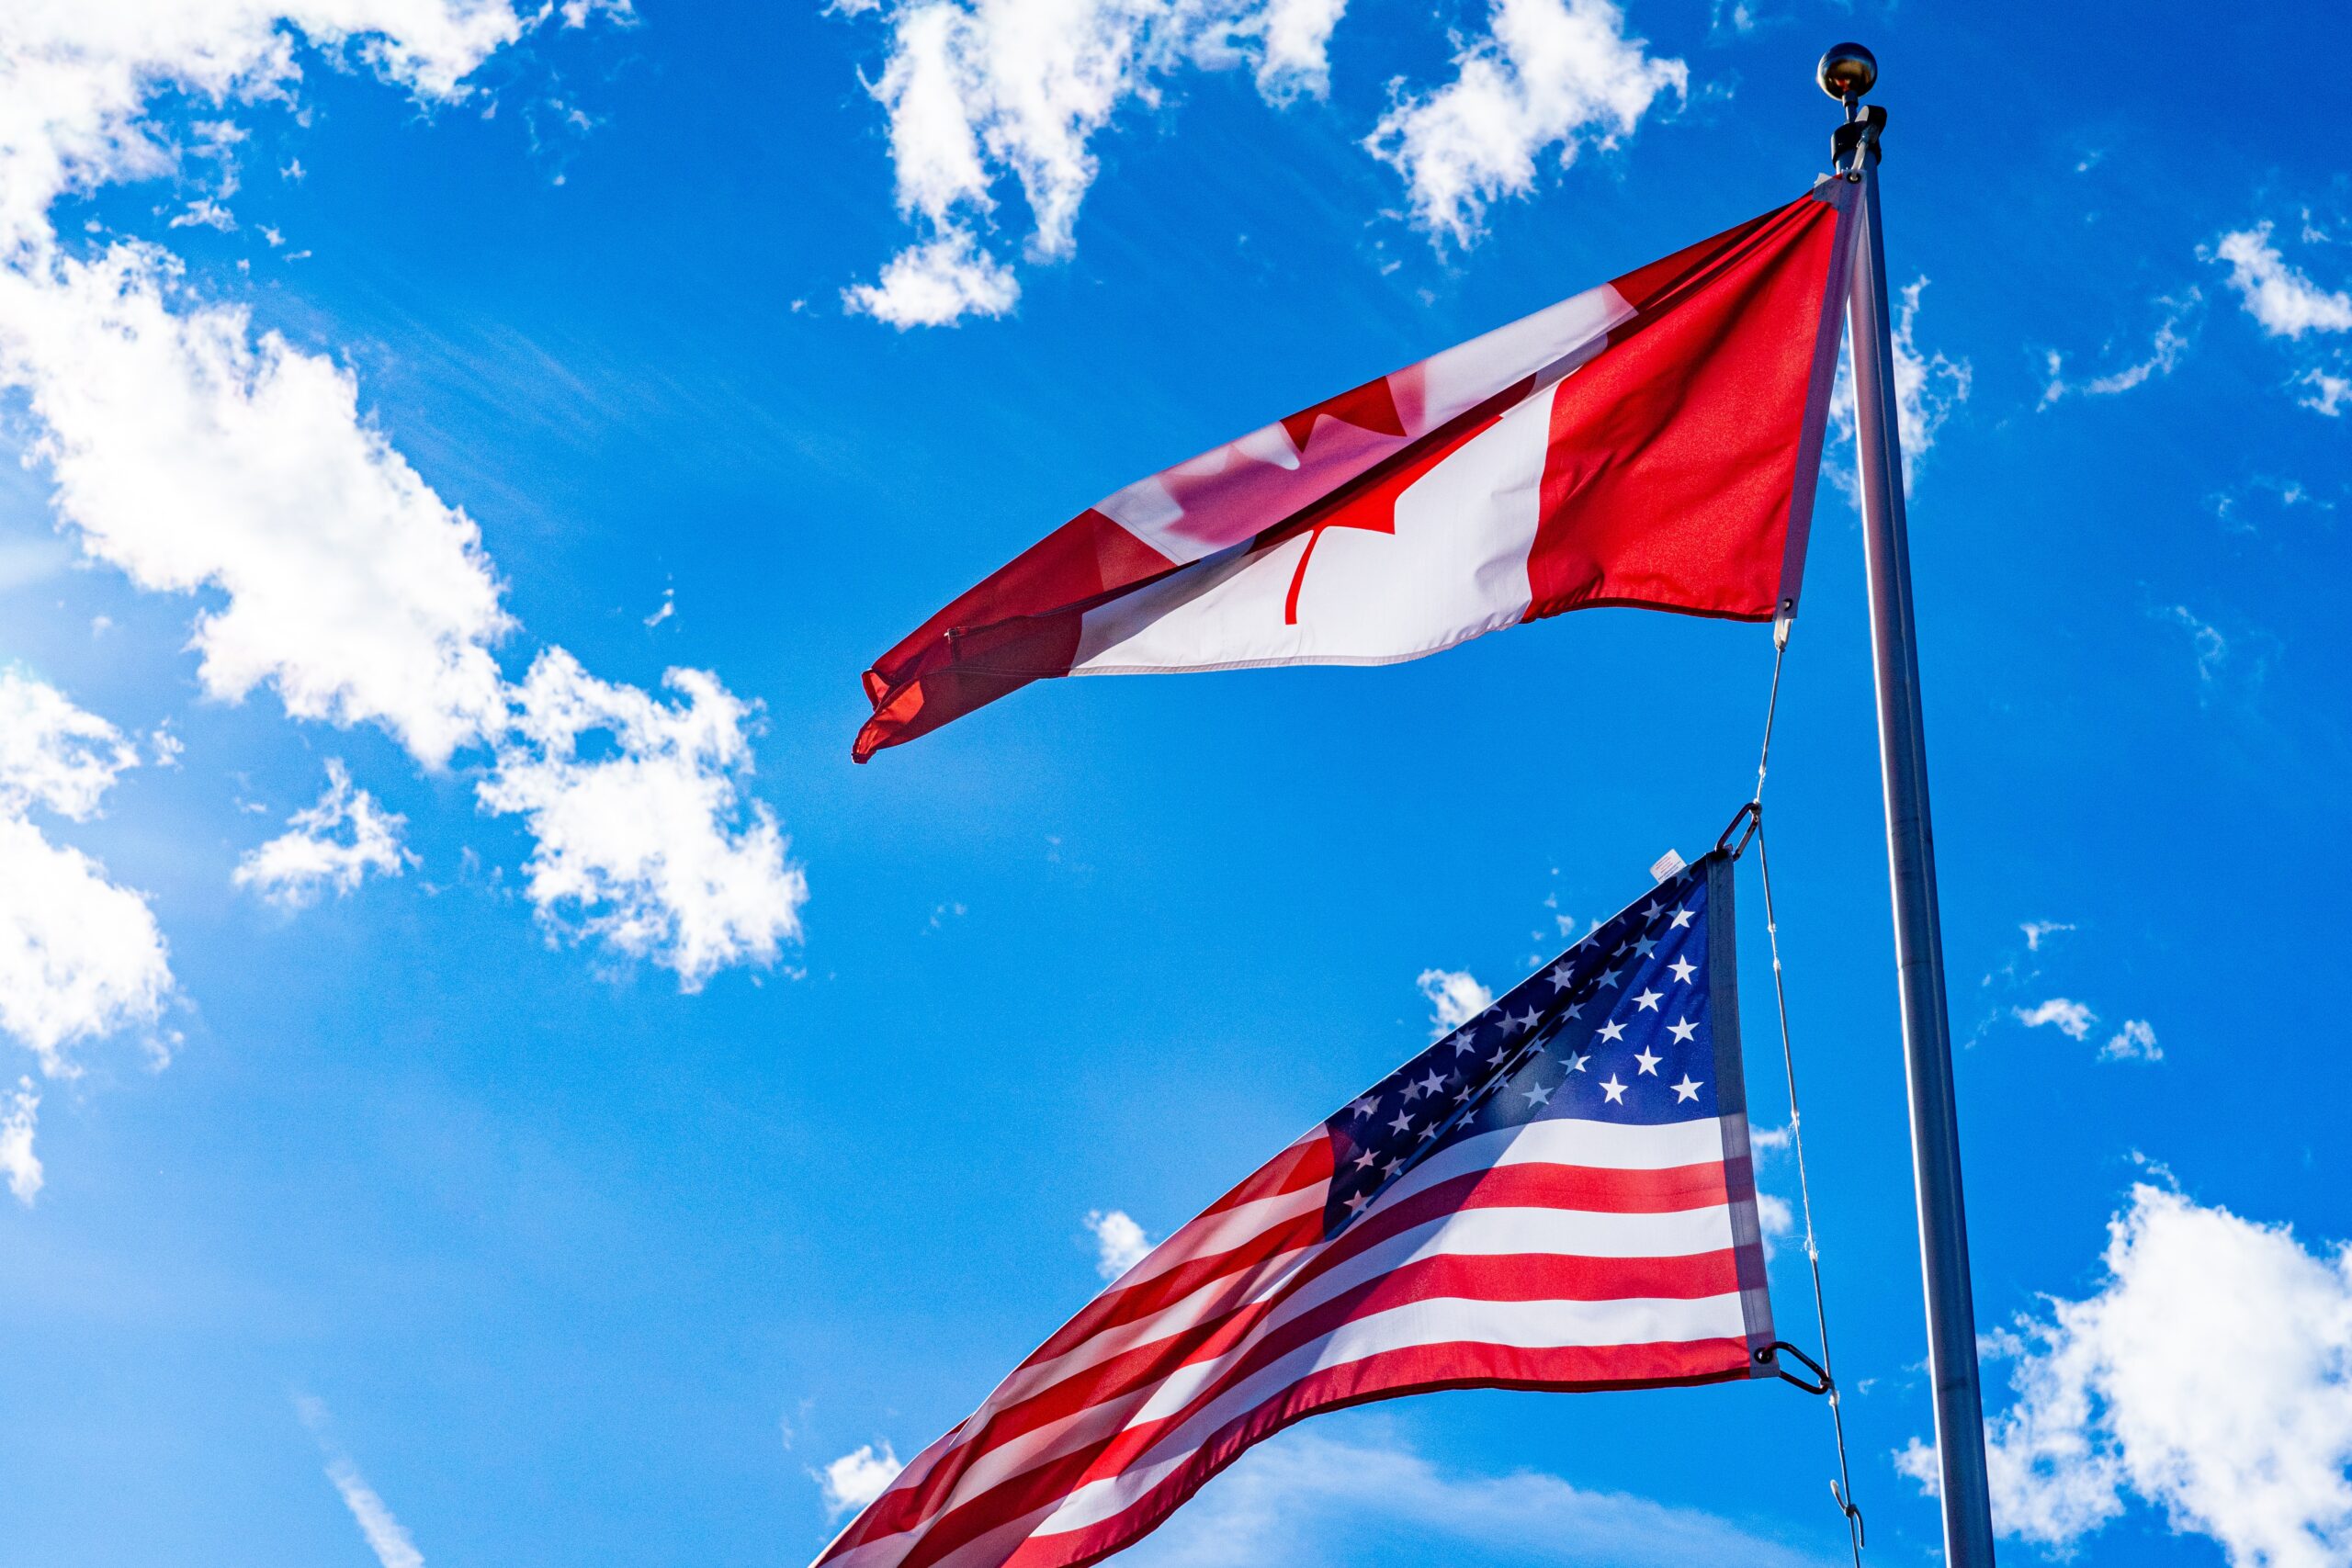 The United States and Canada are now vying for the same talent, with Canada unveiling a new program specifically targeting U.S.-based H-1B visa holders. Photo by Chris Robert on Unsplash.